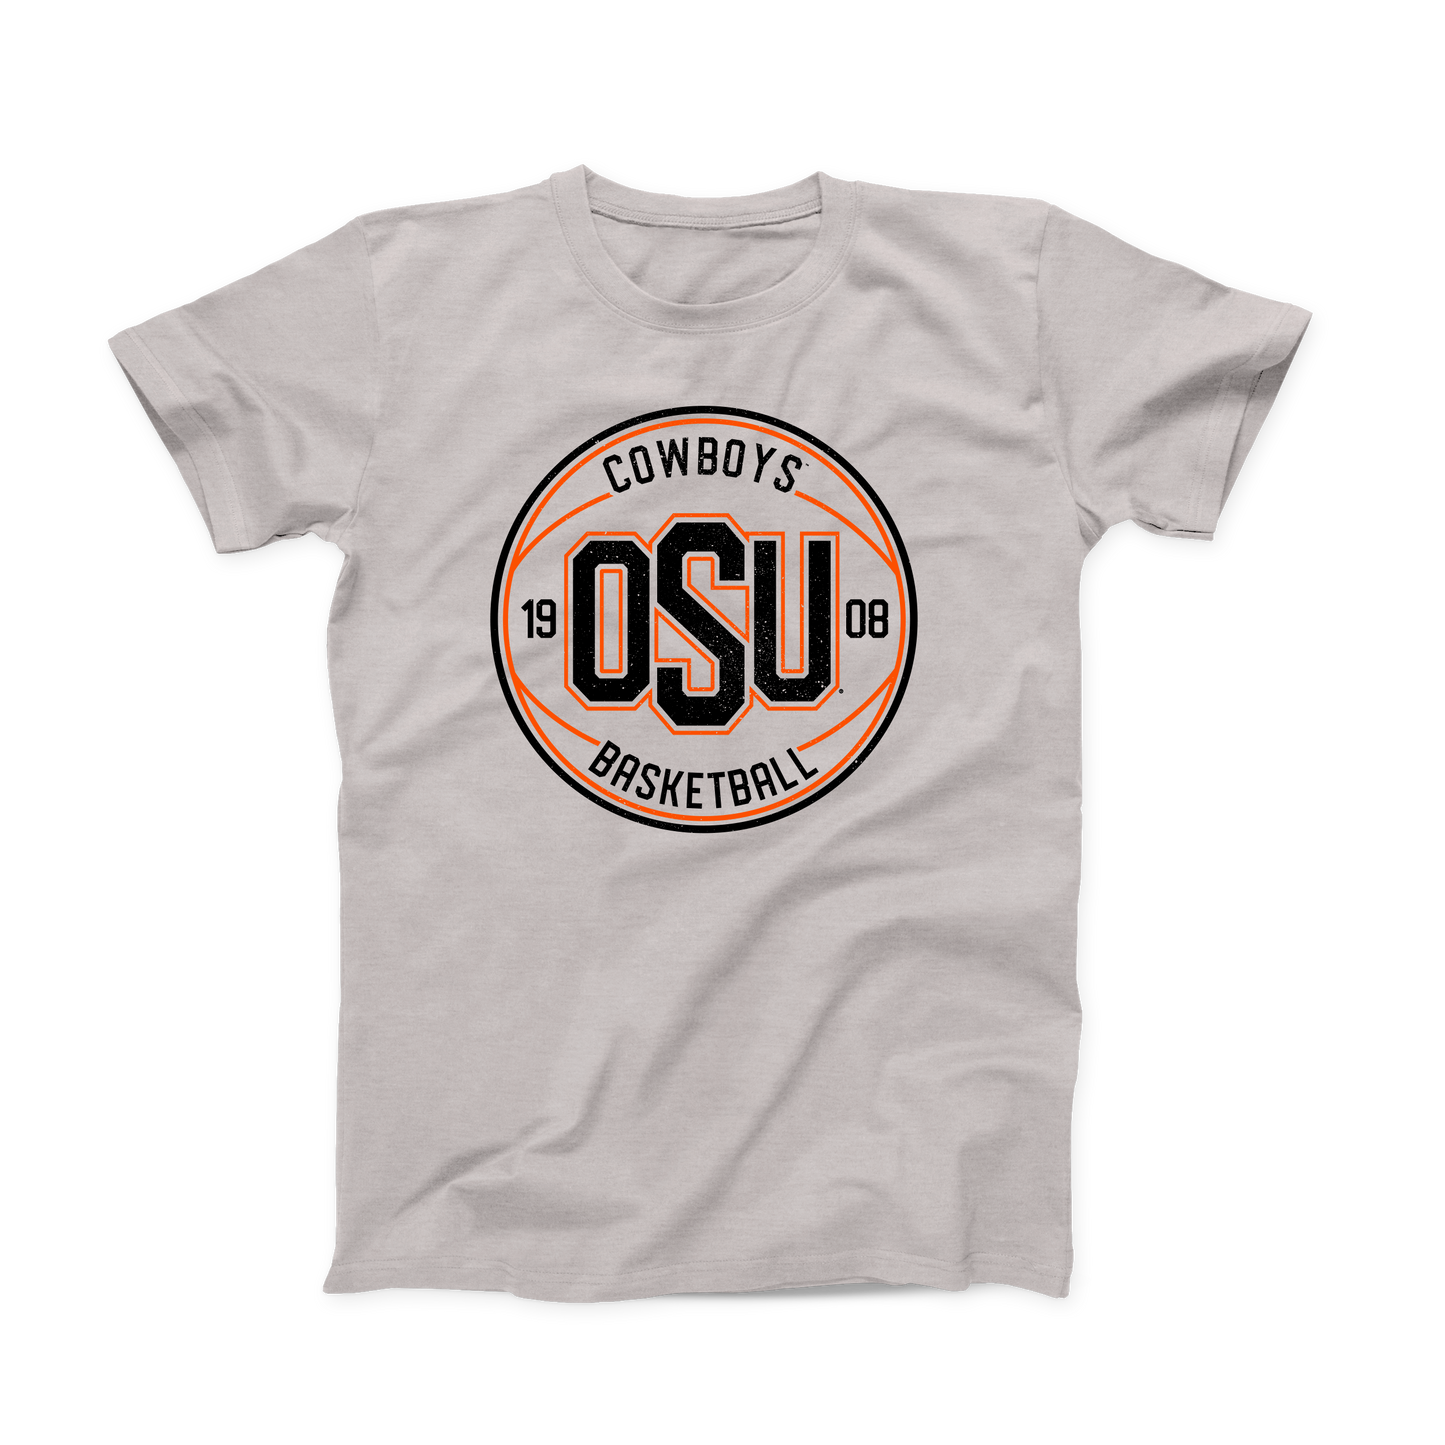 Heather Cool Grey OSU Basketball T-shirt. Orange and black design of a Basketball across the front of the shirt. "COWBOYS 19(OSU)08 BASKETBALL" situated within the basketball design, with "OSU" being the biggest, boldest part of the design at the center, and the rest of the words smaller around it.